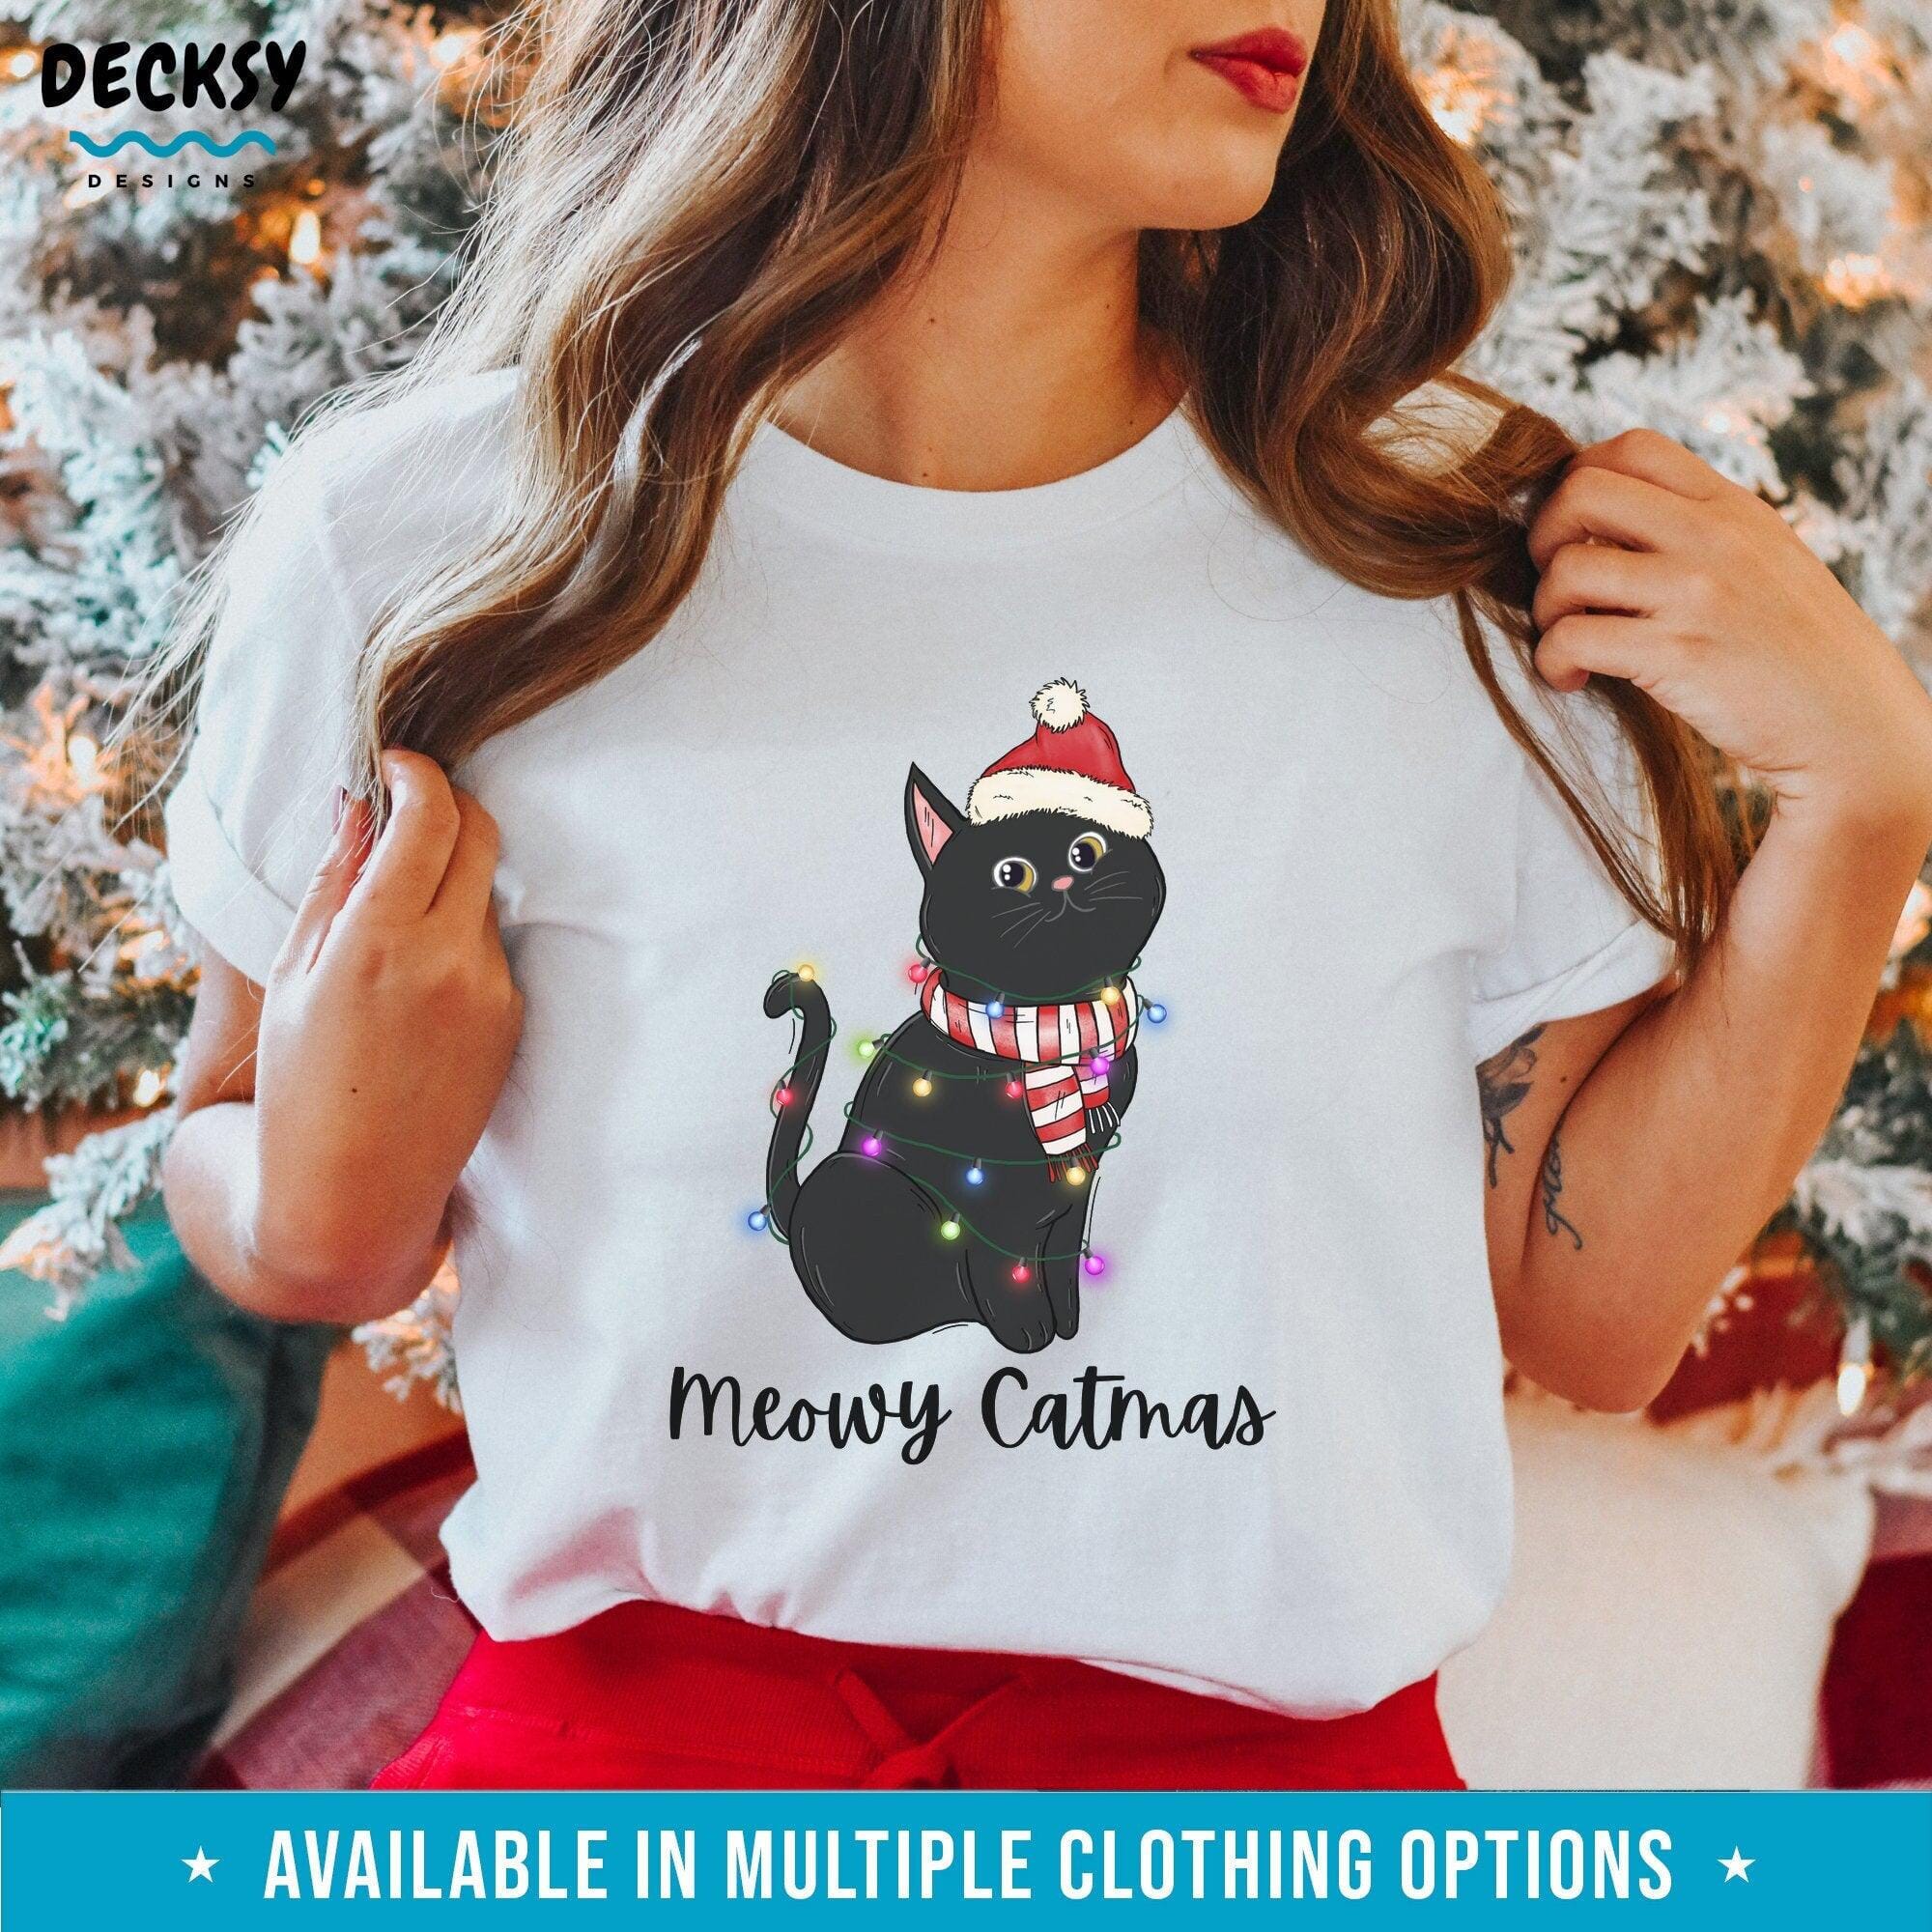 Meowy Catmas Shirt, Christmas Cat Gift-Clothing:Gender-Neutral Adult Clothing:Tops & Tees:T-shirts:Graphic Tees-DecksyDesigns